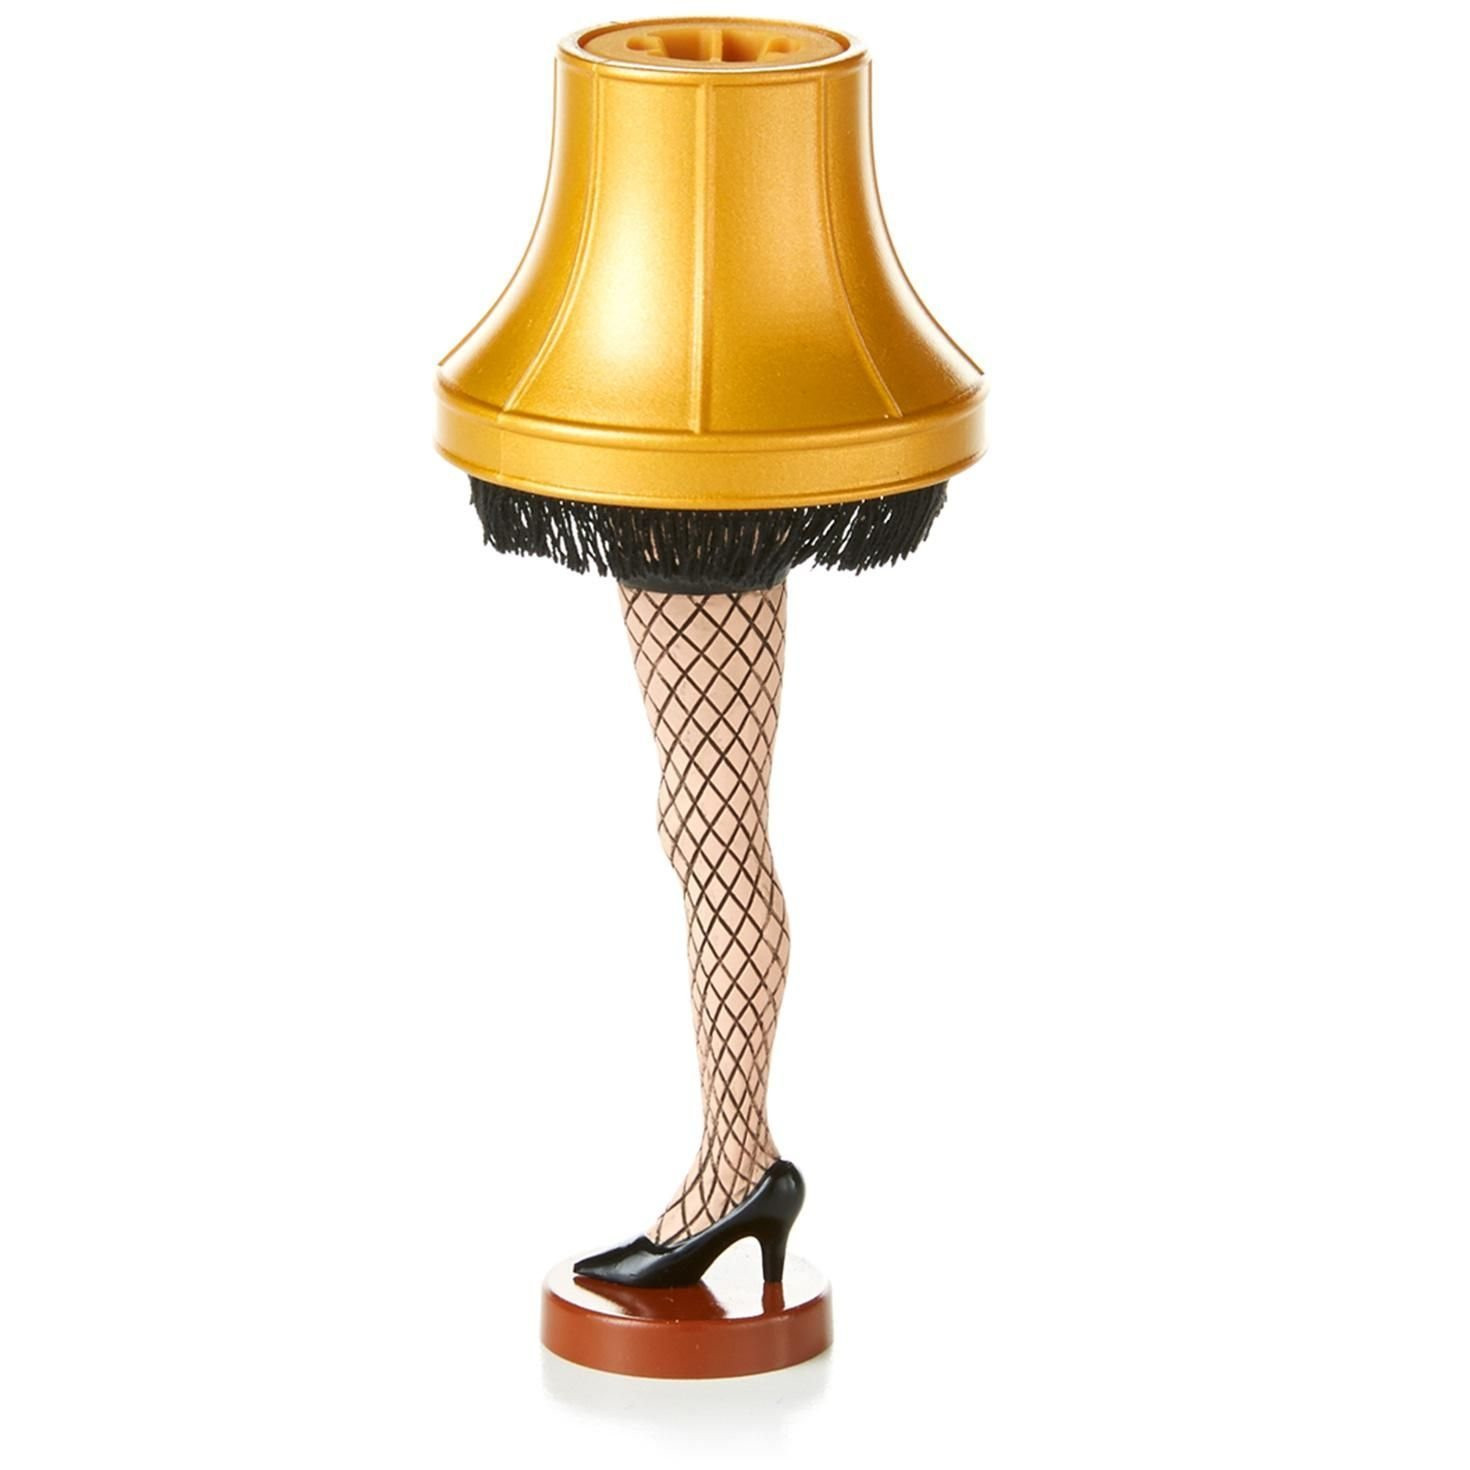 A Christmas Story Lamp
 15 Last Minute Gifts for Under $20